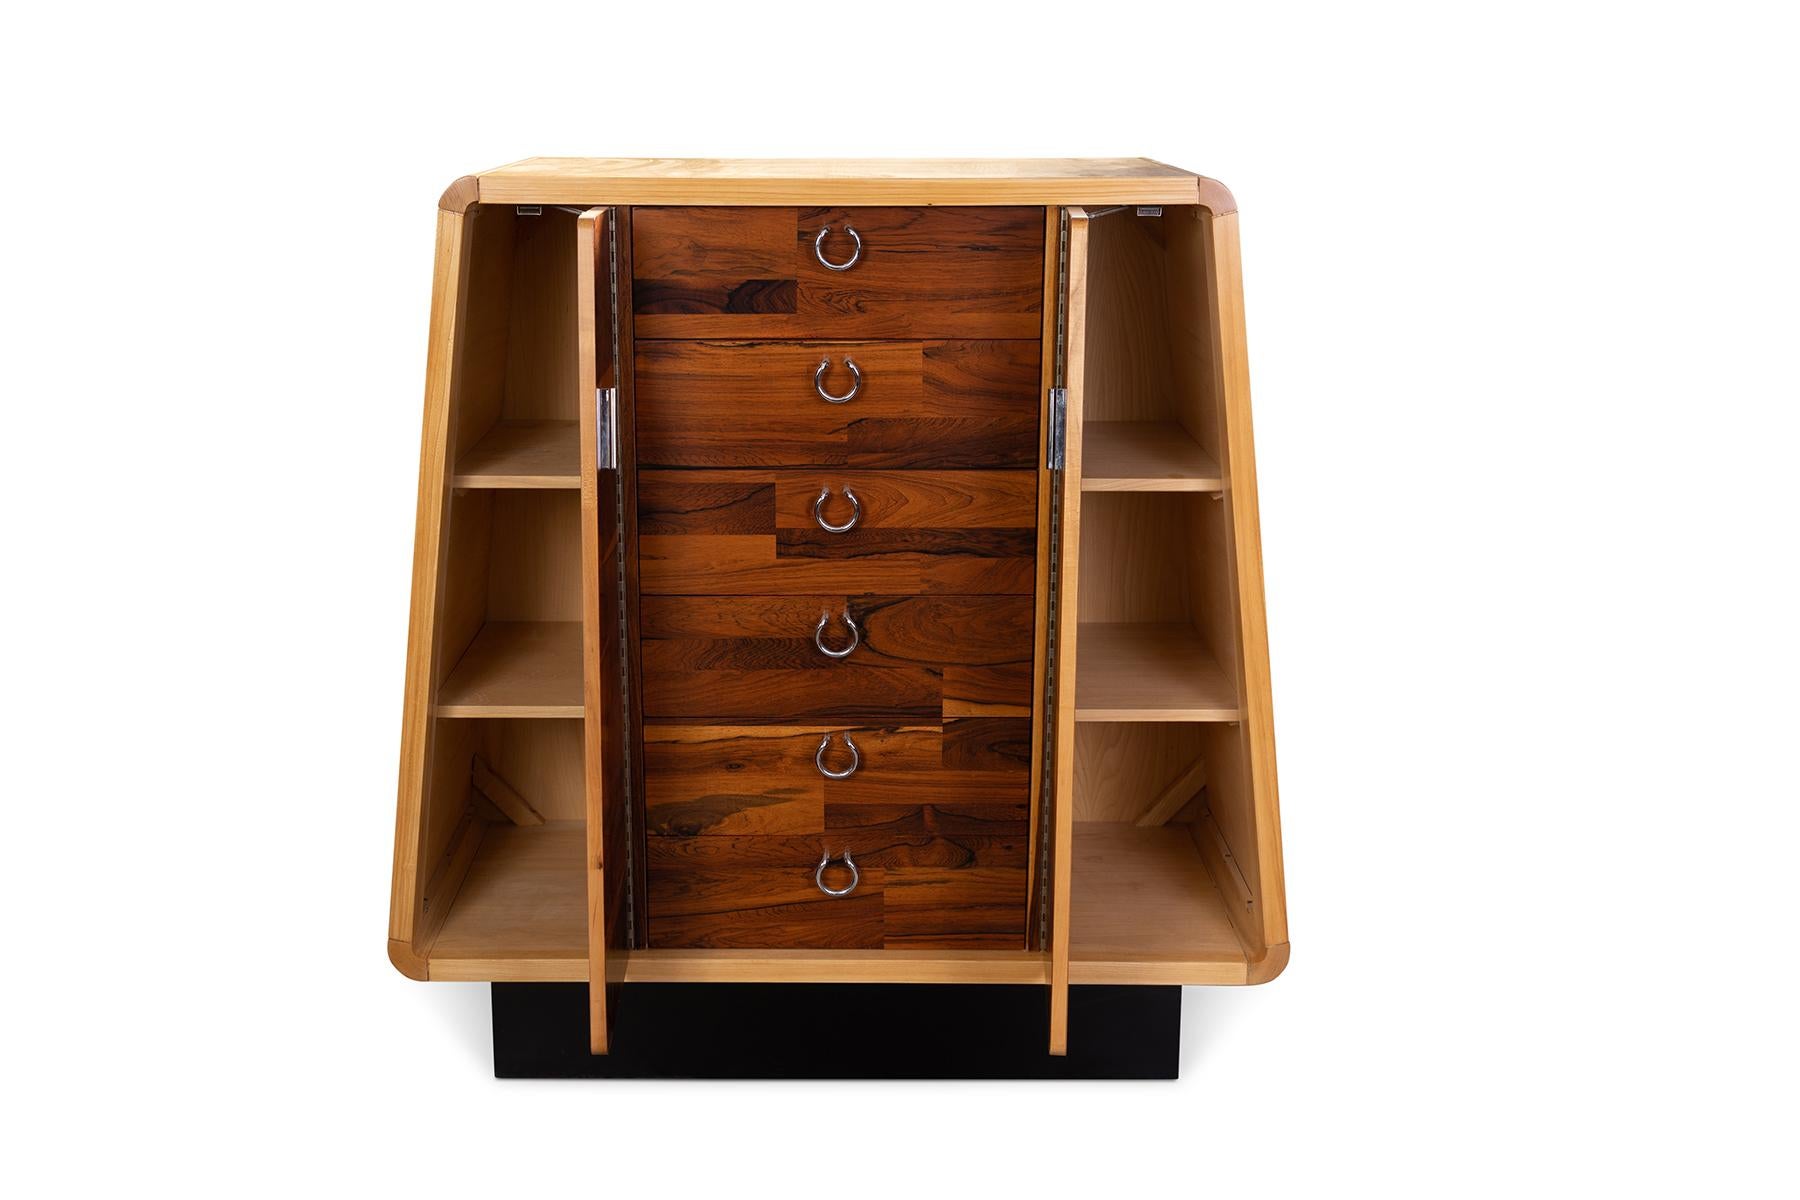 Rosewood, maple and polished steel highboy from Canada circa early 1970s. This sculptural example has been newly and masterfully refinished. It has 6 drawers and two doors with interior storage.